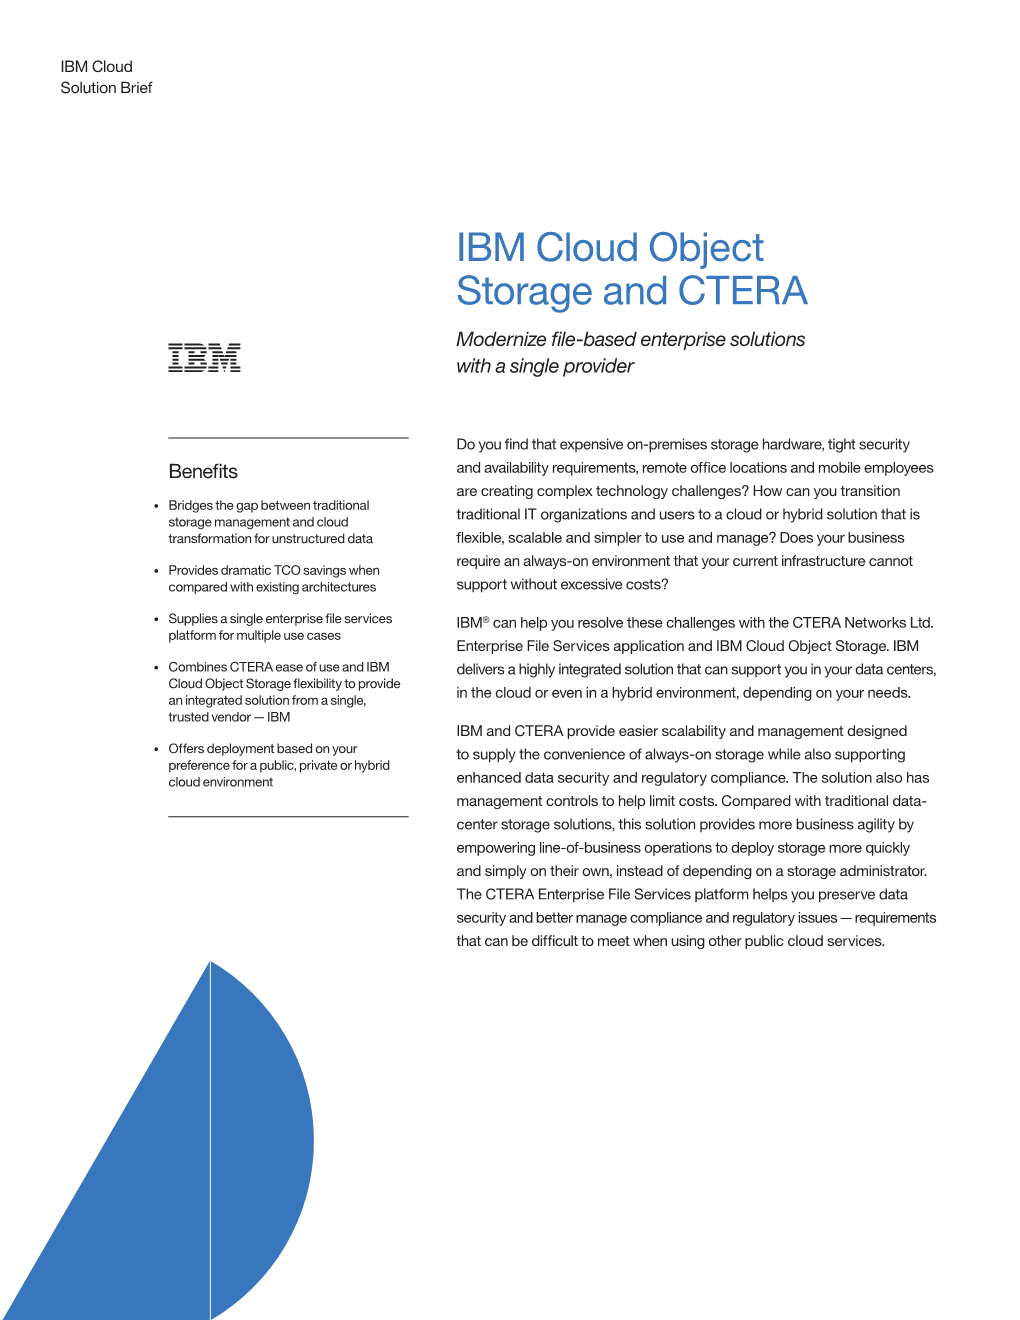 IBM Cloud Object Storage and CTERA Modernize File-Based Enterprise Solutions with a Single Provider